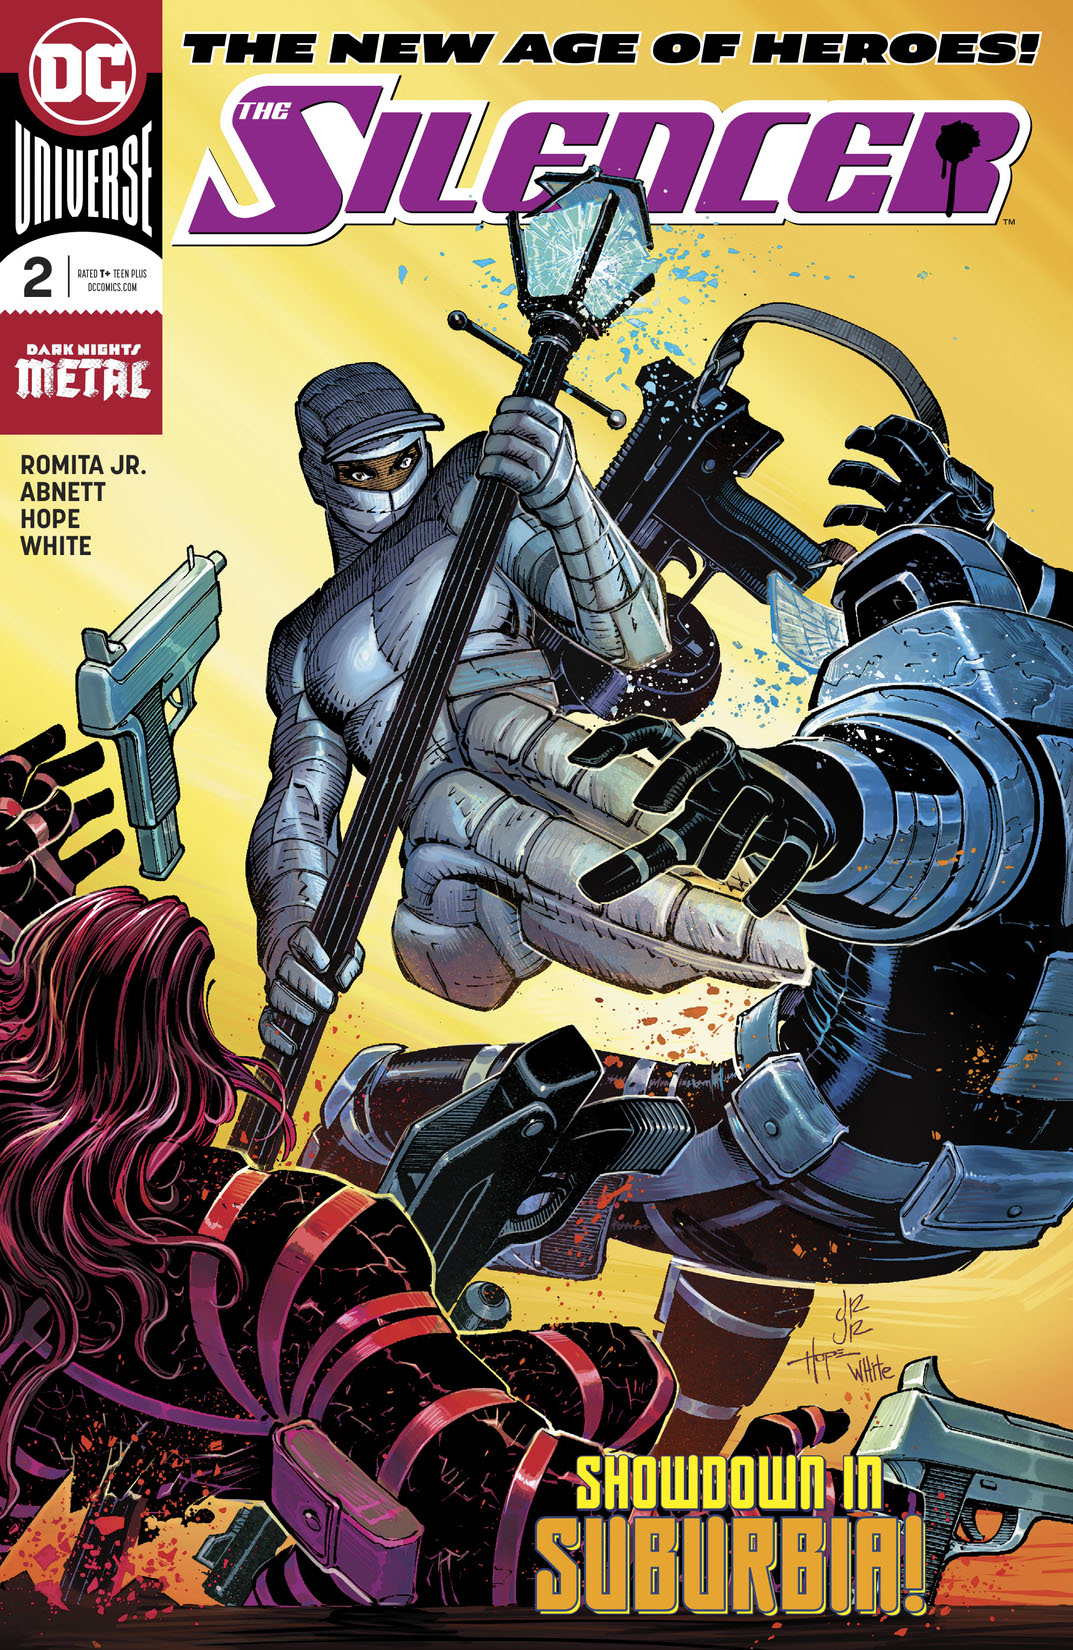 The Silencer #2 preview images